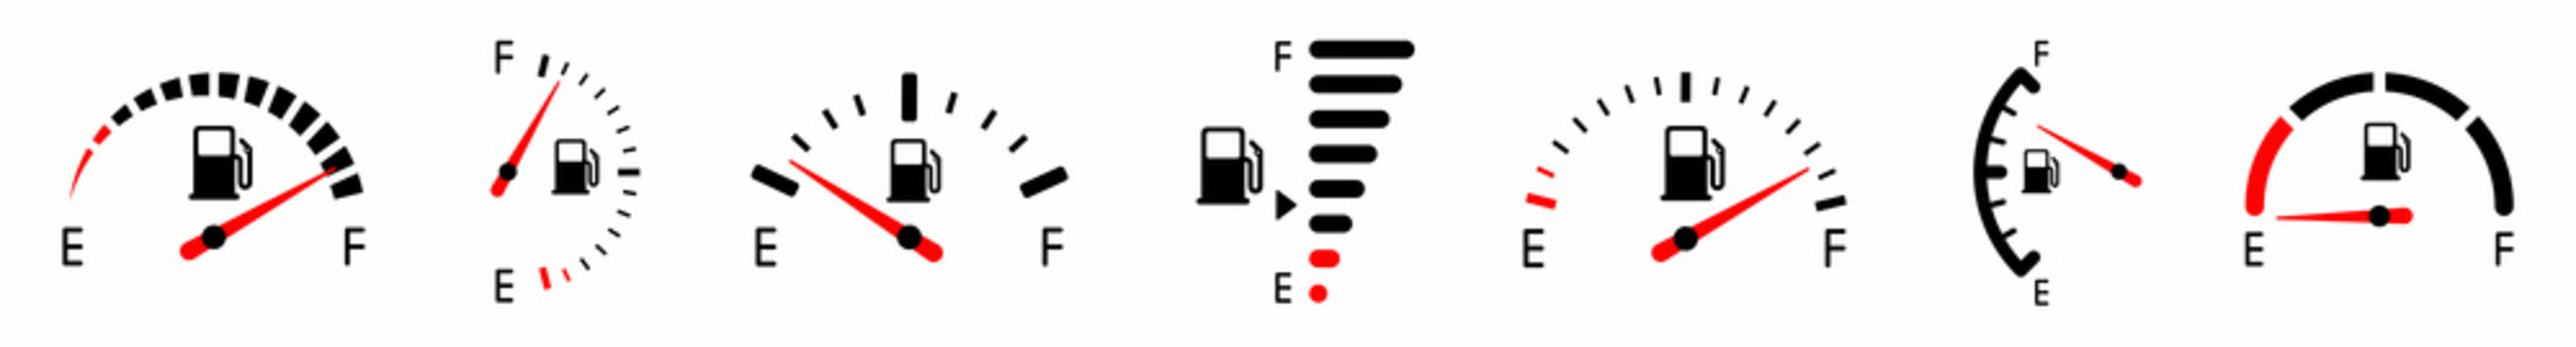 Fuel gauge indicator. Full fuel gauge icon set. Gas tank. Different dashboard auto panel equipment with arrow. Vector illustration.